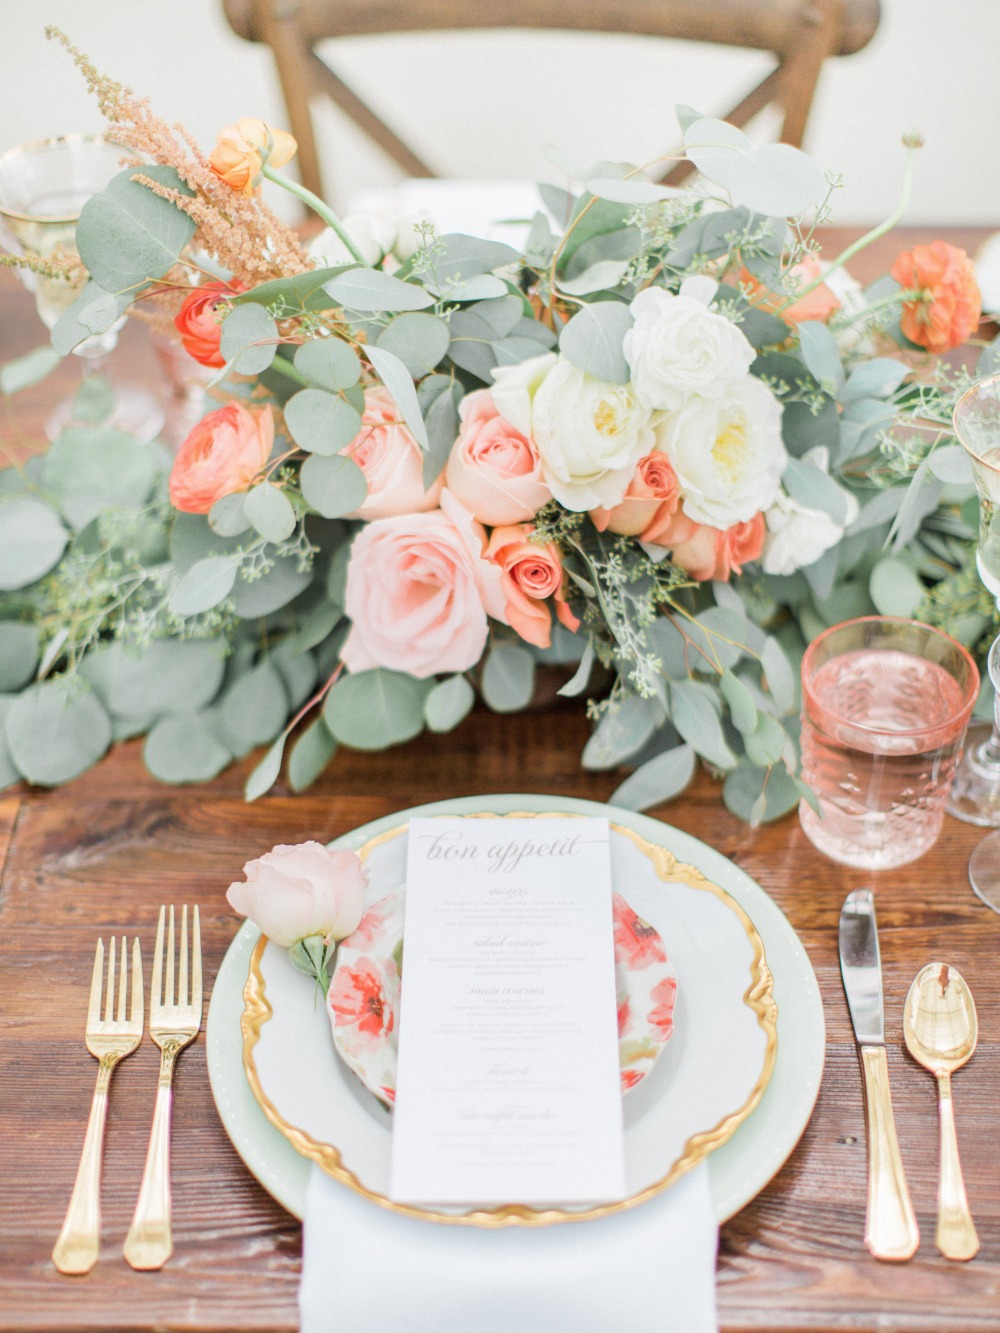 Stylish table decor and gold rimmed plates